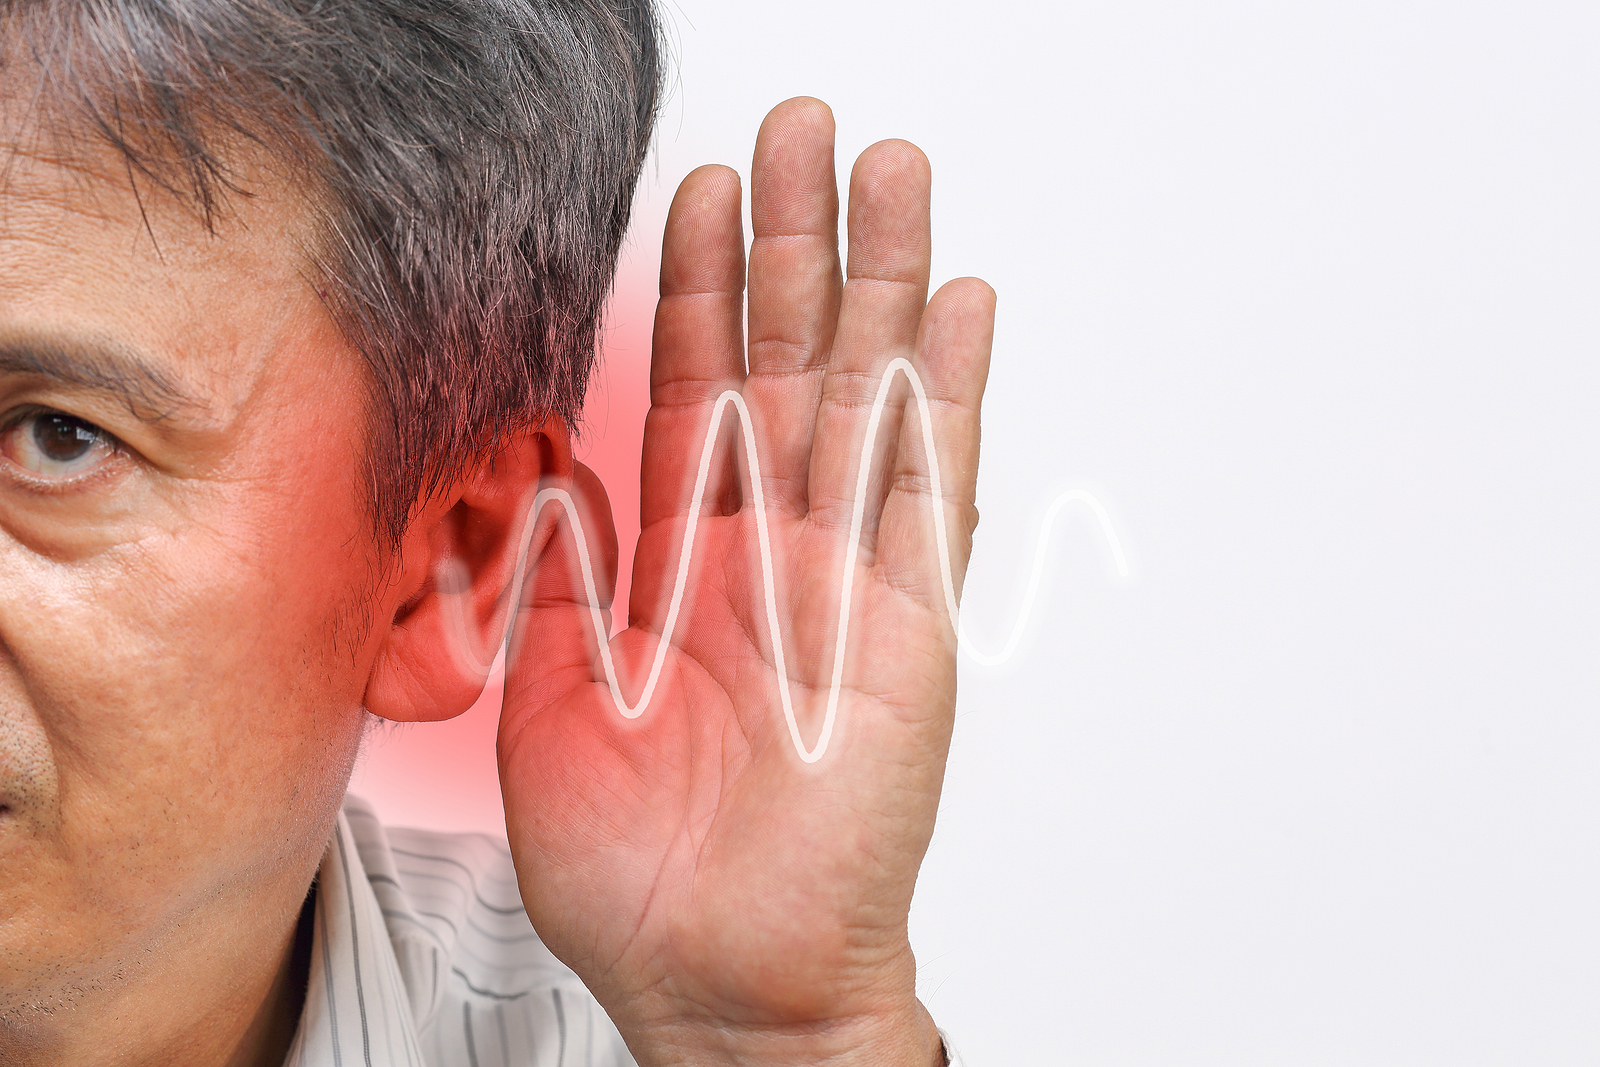 Featured image for “Working with Hearing Loss”